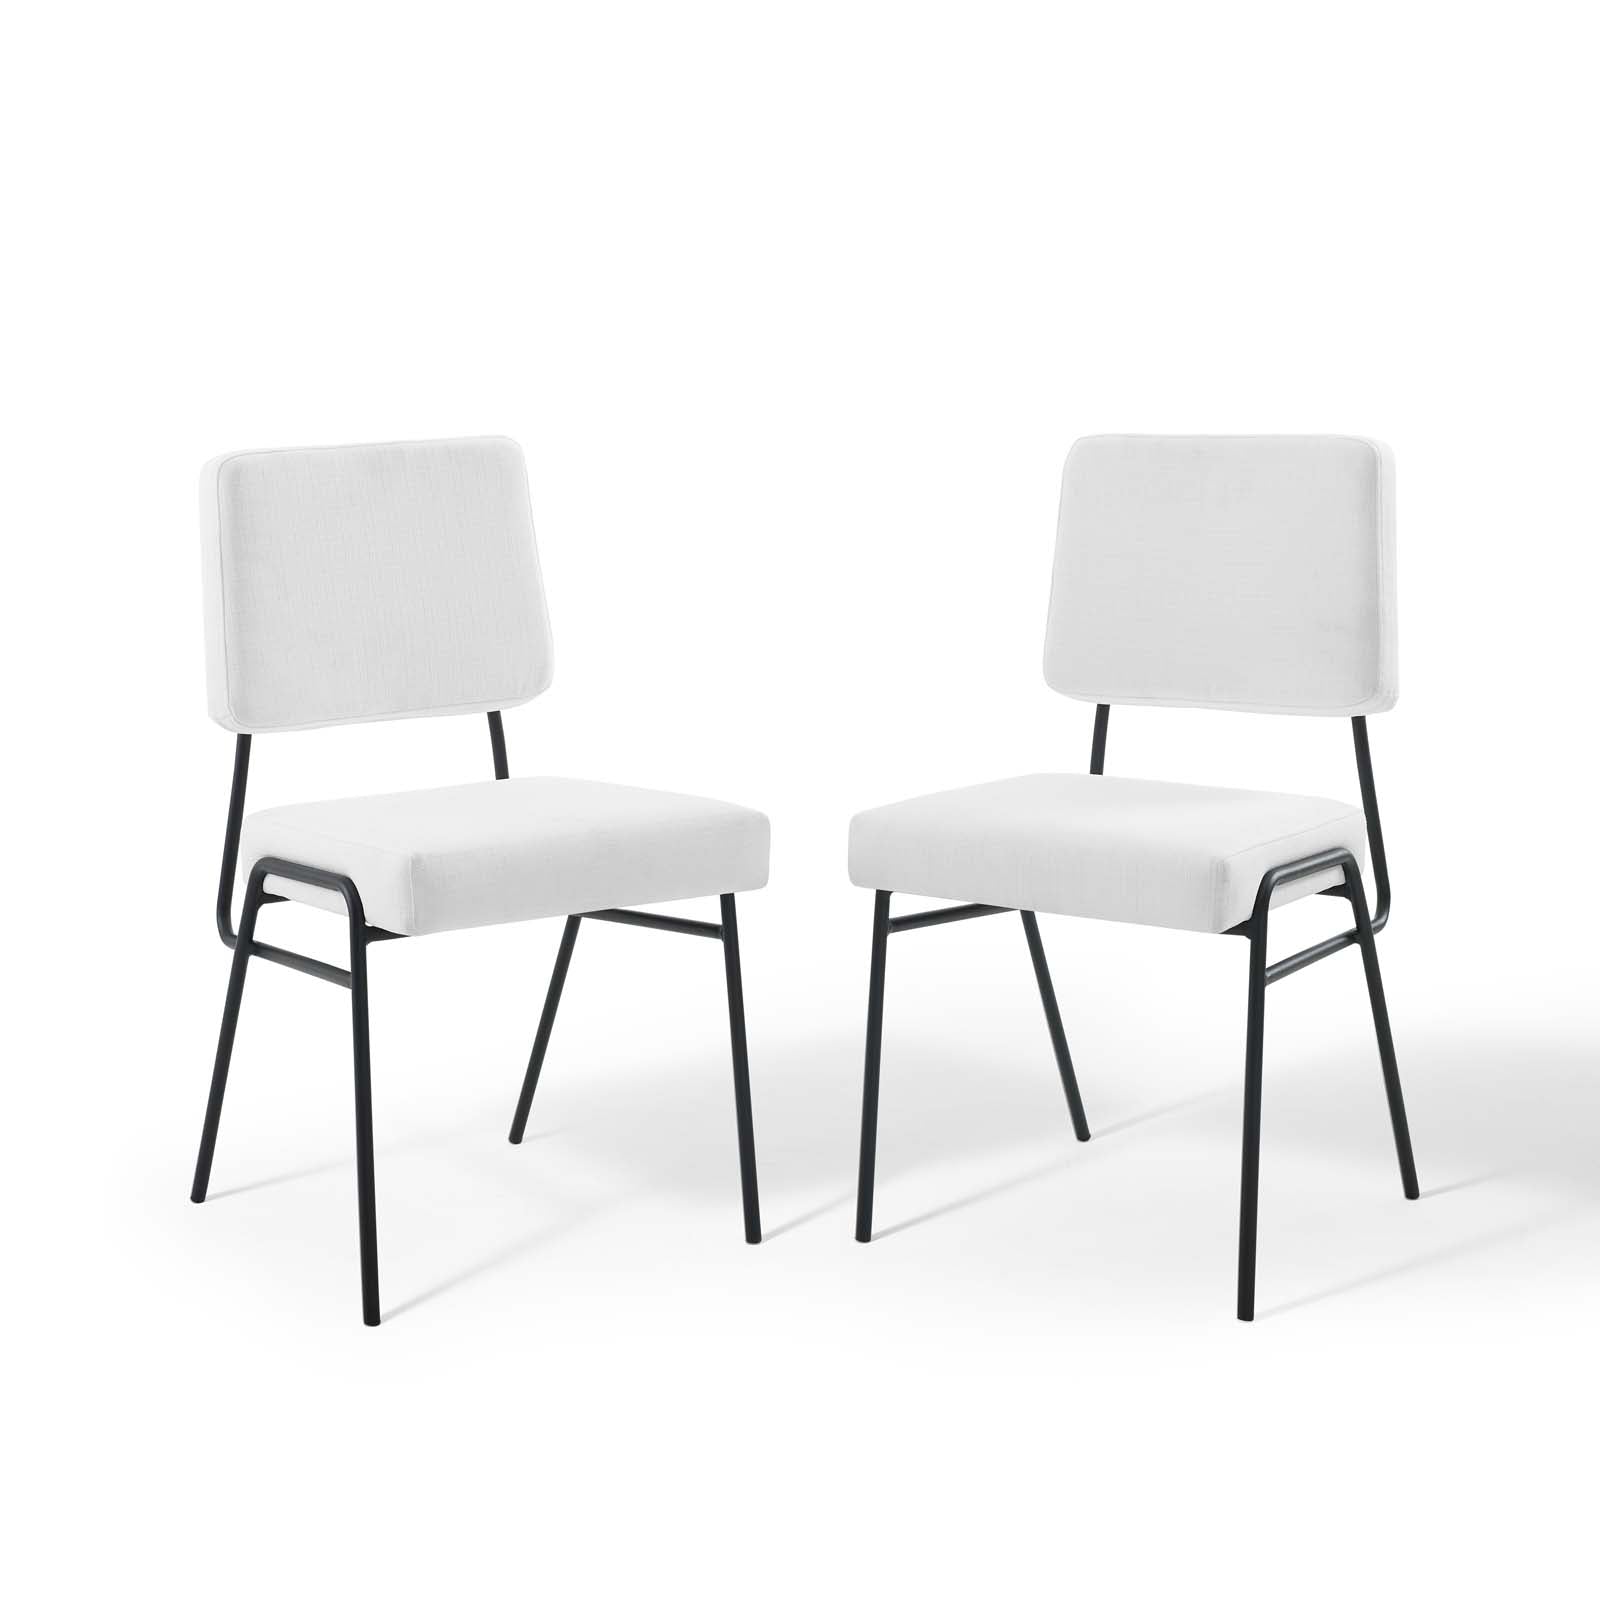 Craft Dining Side Chair Upholstered Fabric Set of 2 - East Shore Modern Home Furnishings